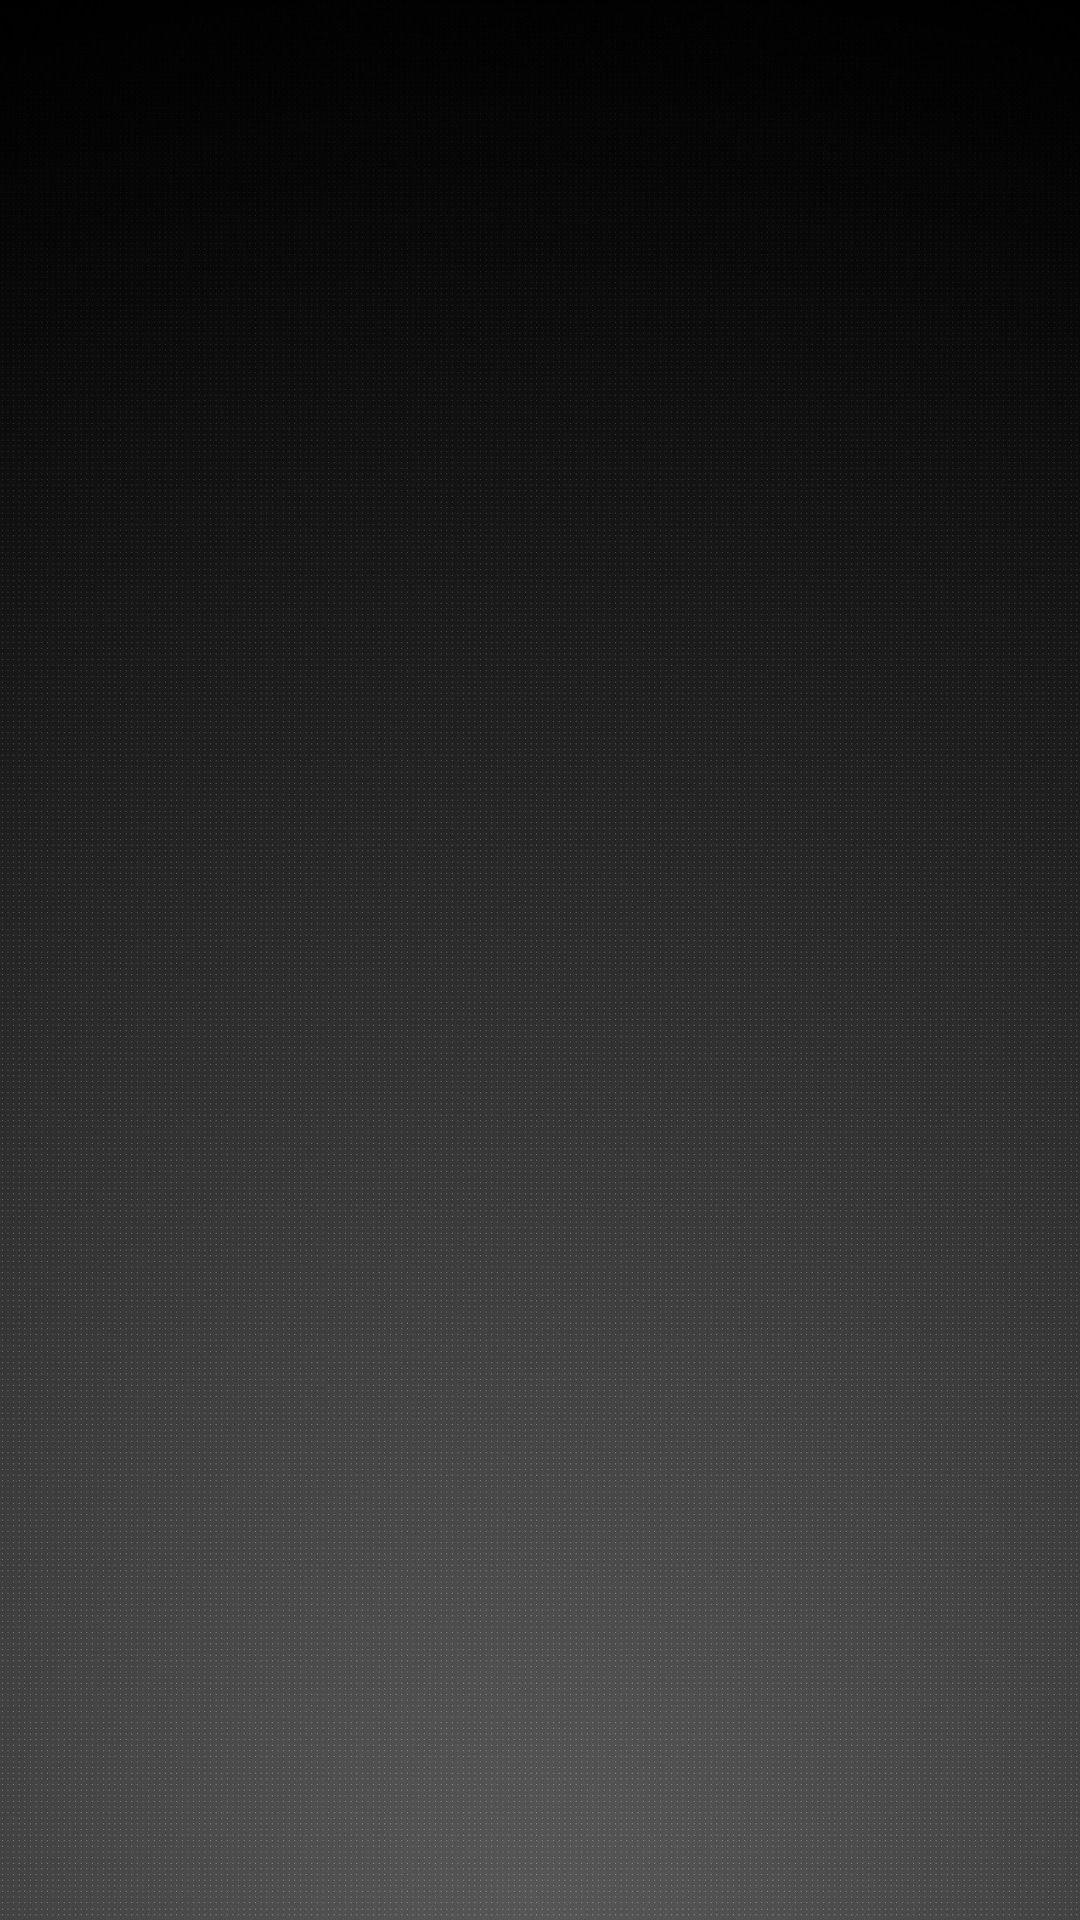 Gray and cool iPhone XS wallpaper. Grey wallpaper iphone, Grey wallpaper phone, Black wallpaper iphone